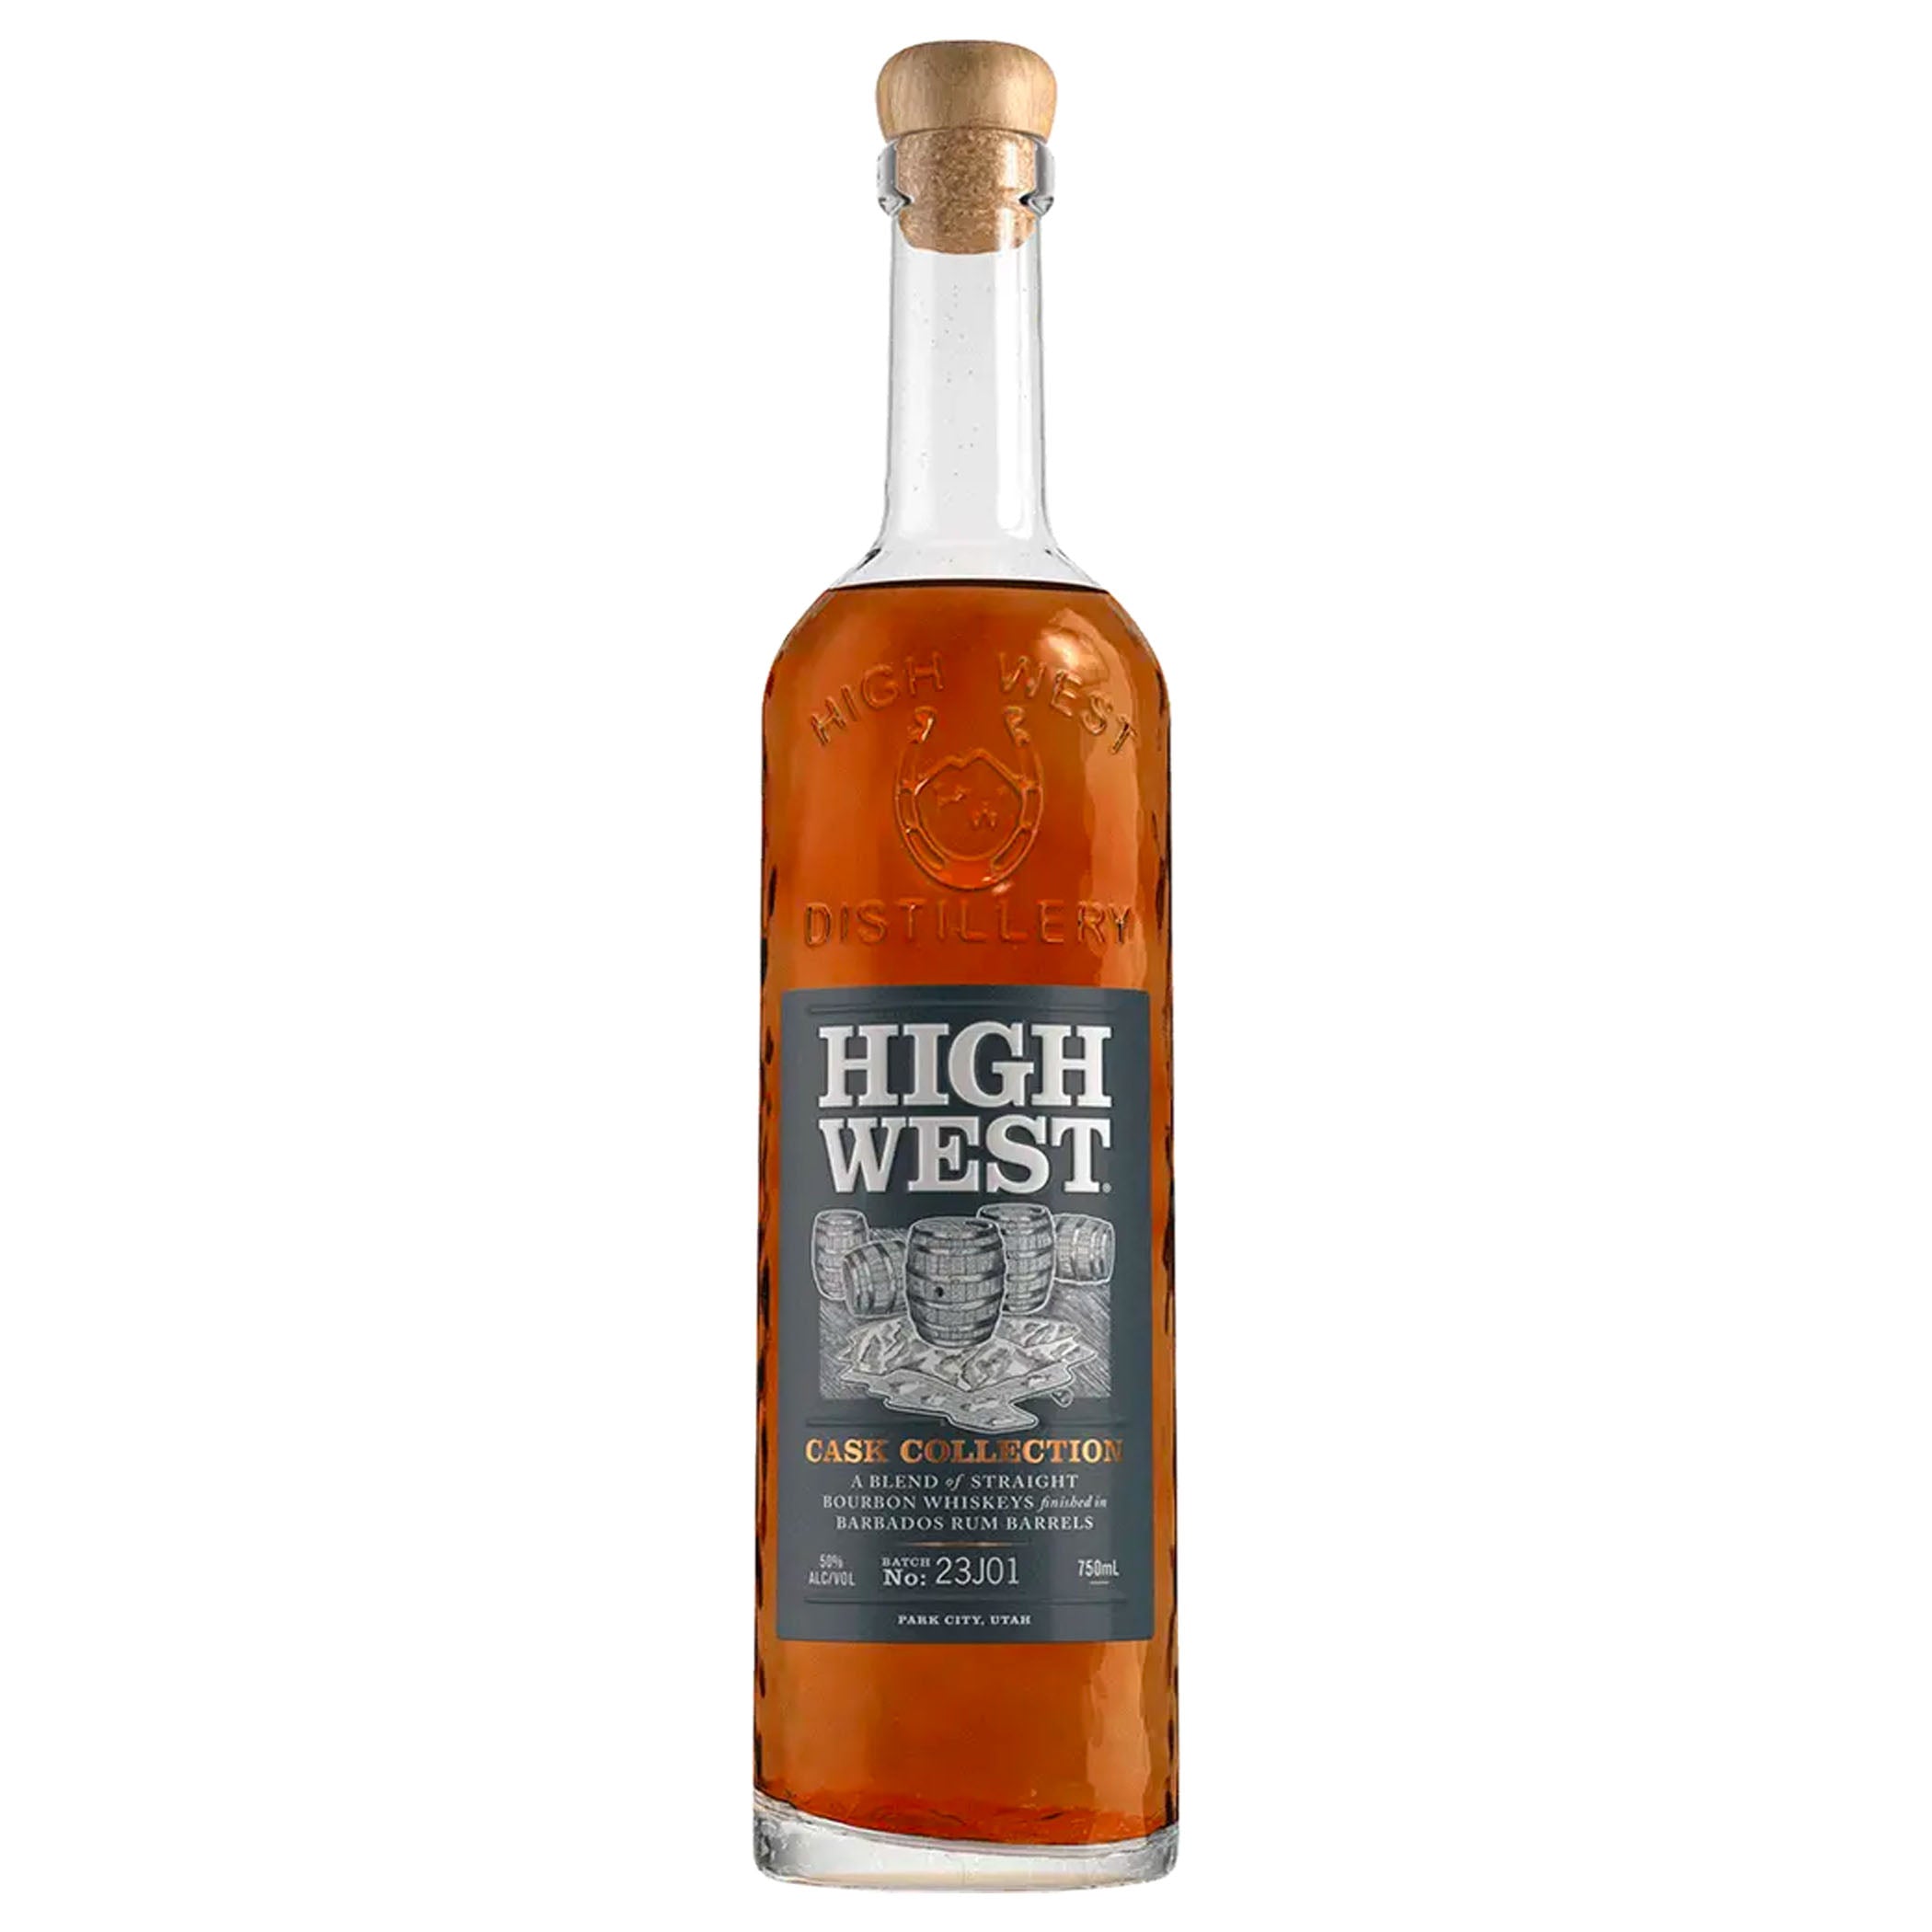 High West Cask Collection Barbados Rum Barrel Finish